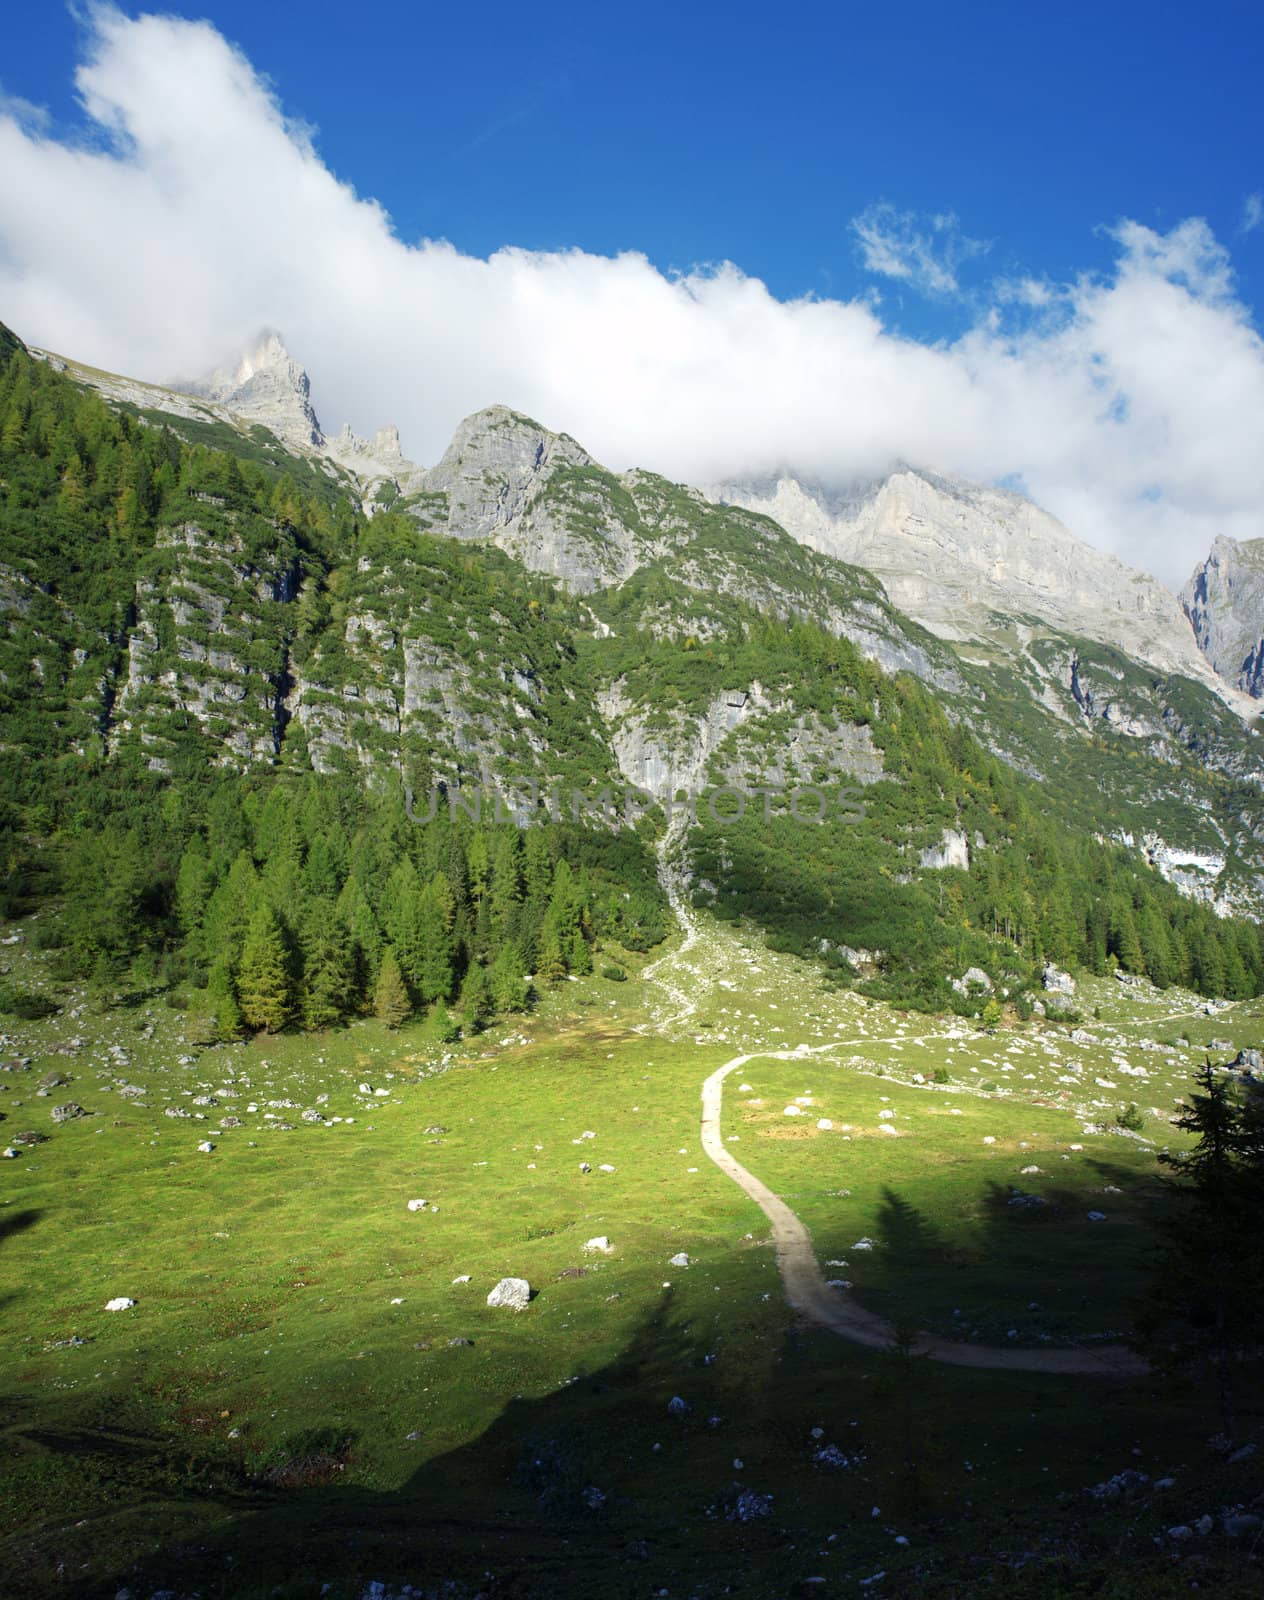 Stitched panorama of a beautiful valley in the mountains